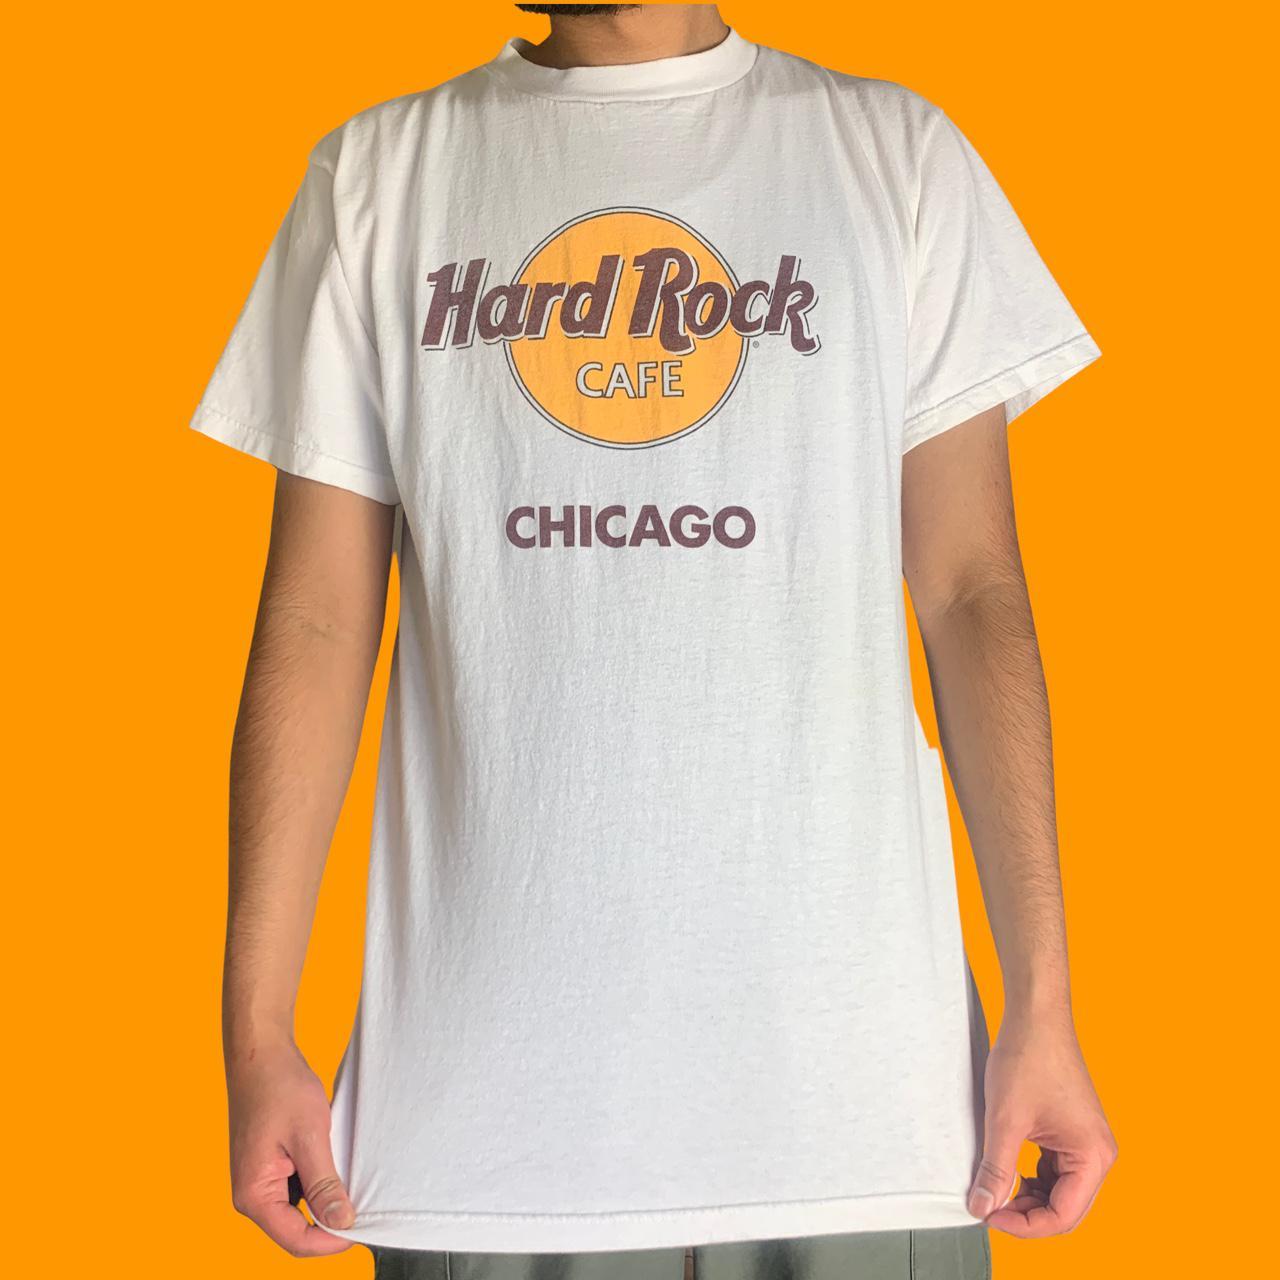 Product Image 1 - Hard Rock Cafe Chicago T-shirt

Cool